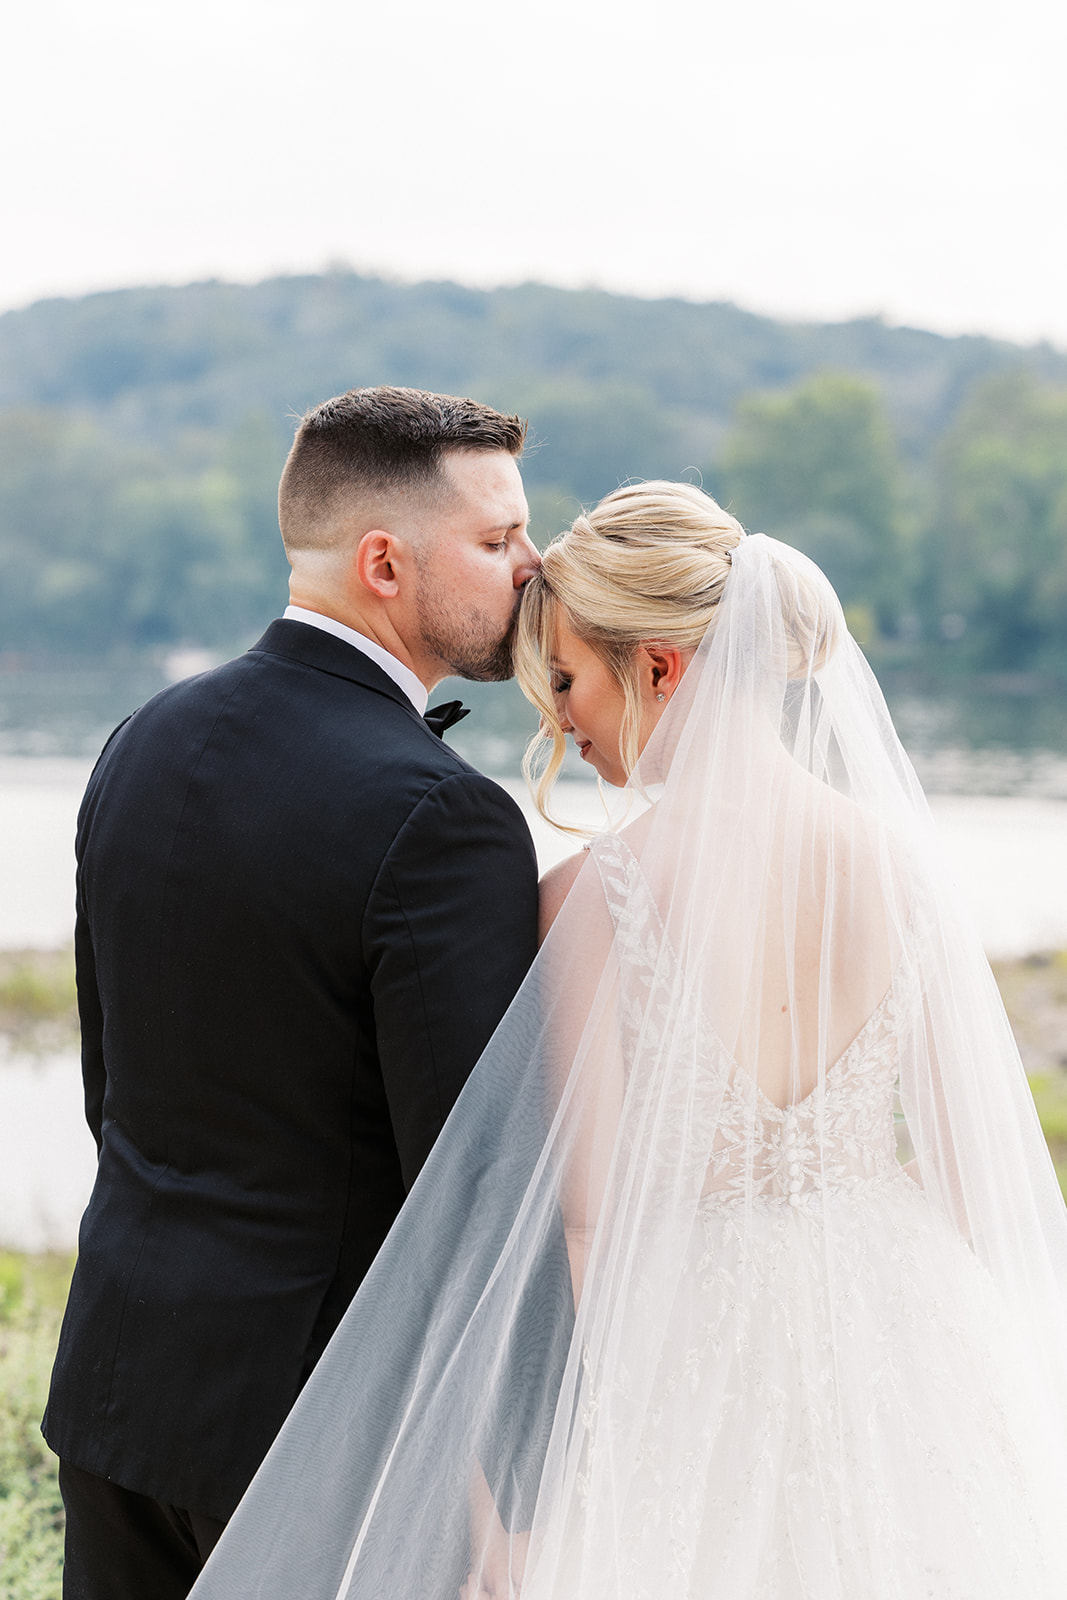 A groom kisses the forehead of his bride as they look out over the river